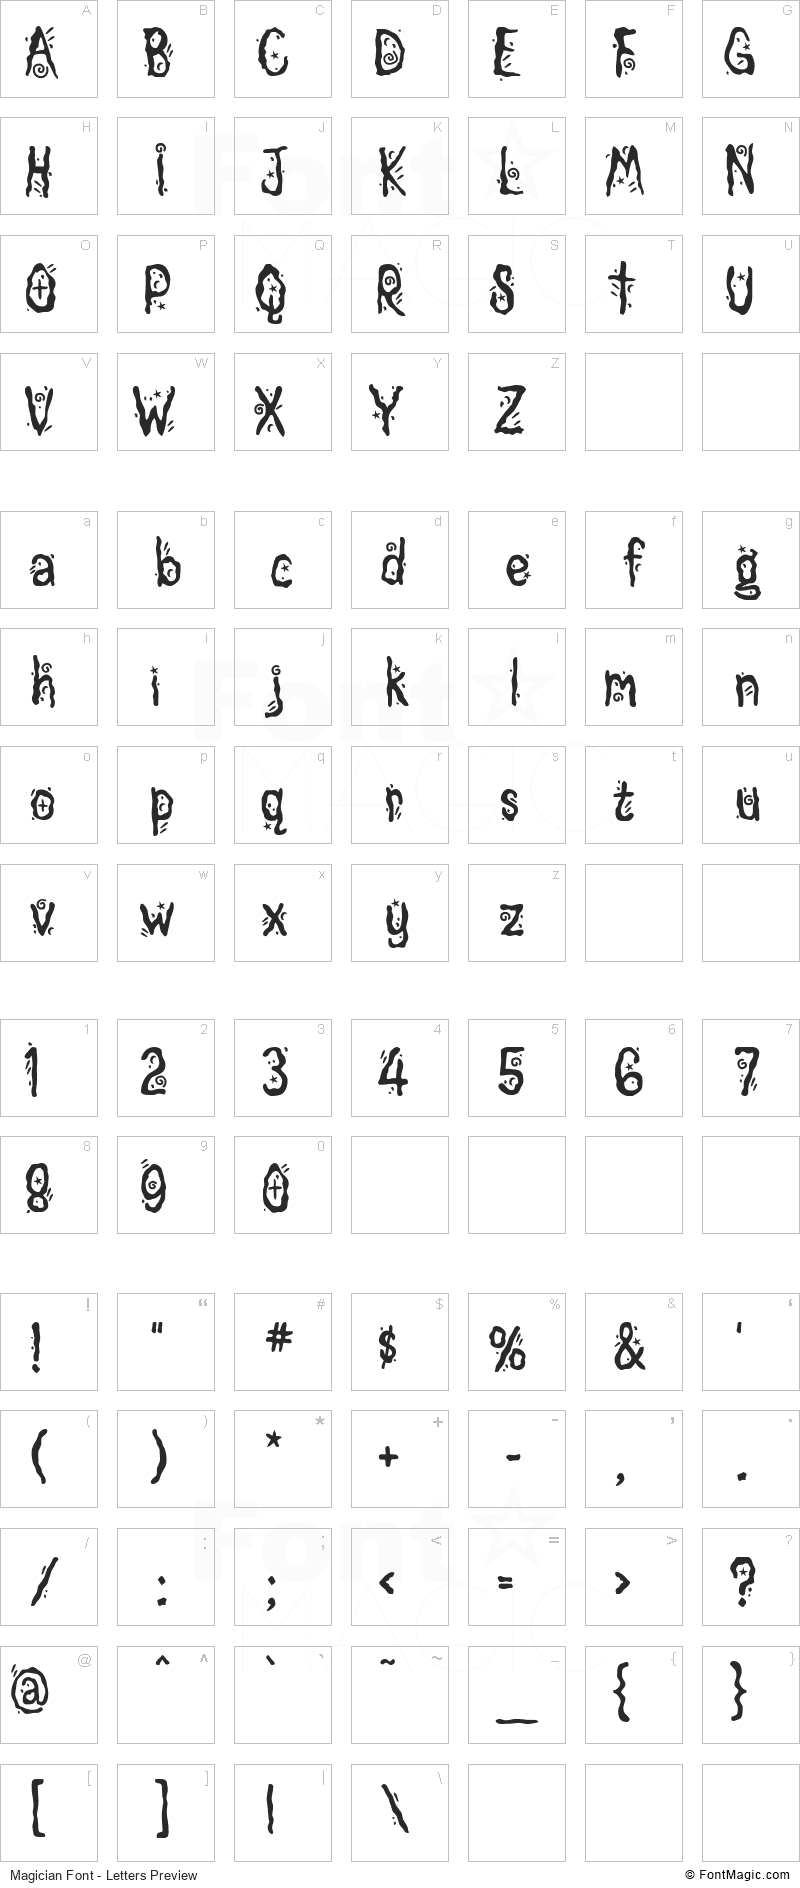 Magician Font - All Latters Preview Chart